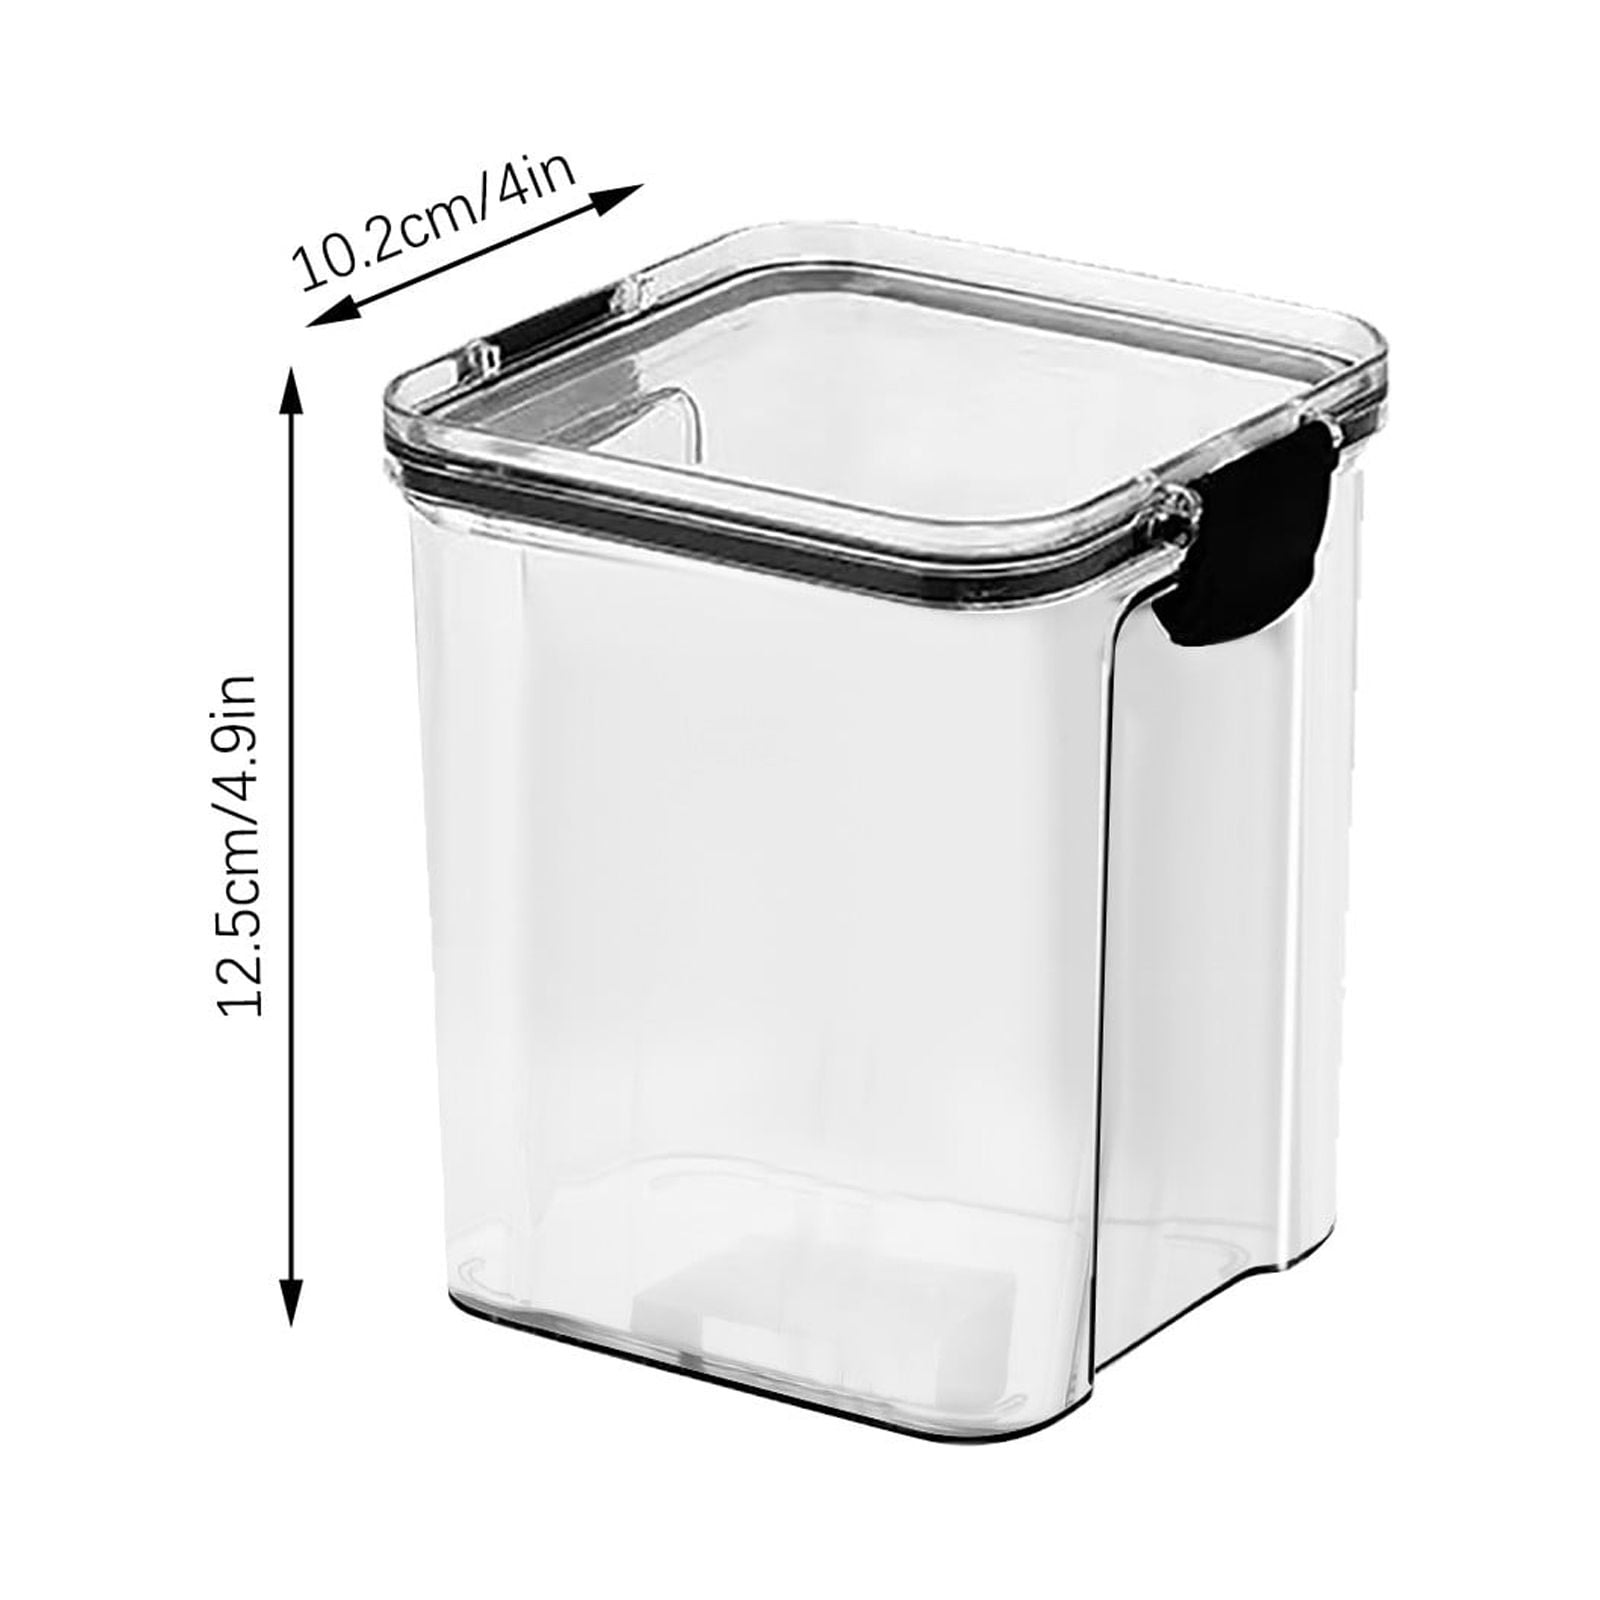 Oavqhlg3b Airtight Food Storage Containers Kitchen Organization with Lids for Pantry Organization,Plastic Kitchen Organization for Cereal,Rice,Pasta